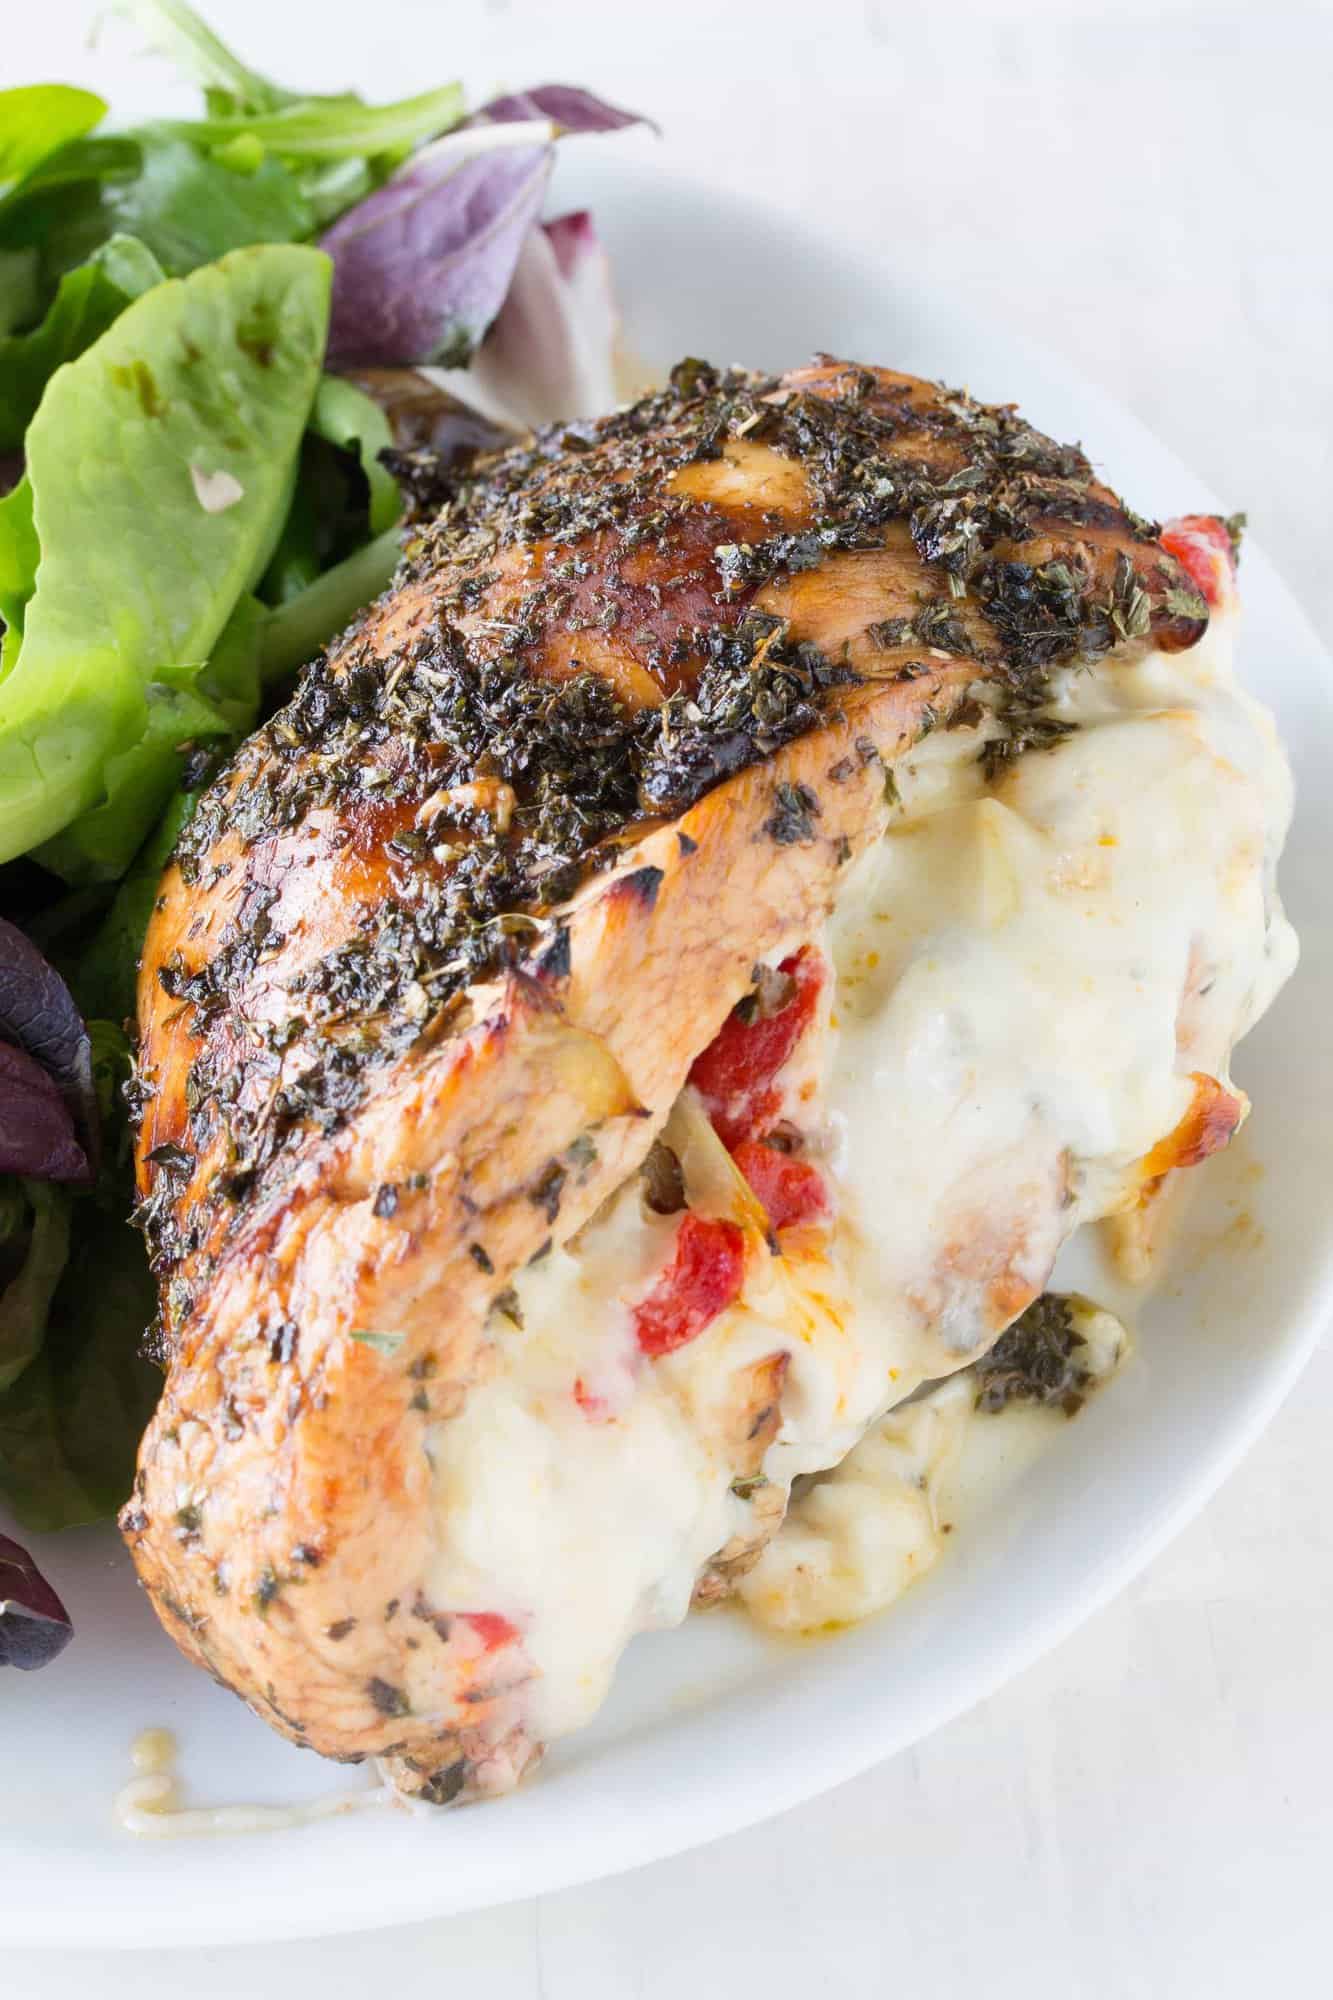 Balsamic and herb glazed chicken, stuffed with artichoke, bell pepper, and fennel. This Italian Stuffed Chicken will tickle your tastebuds!